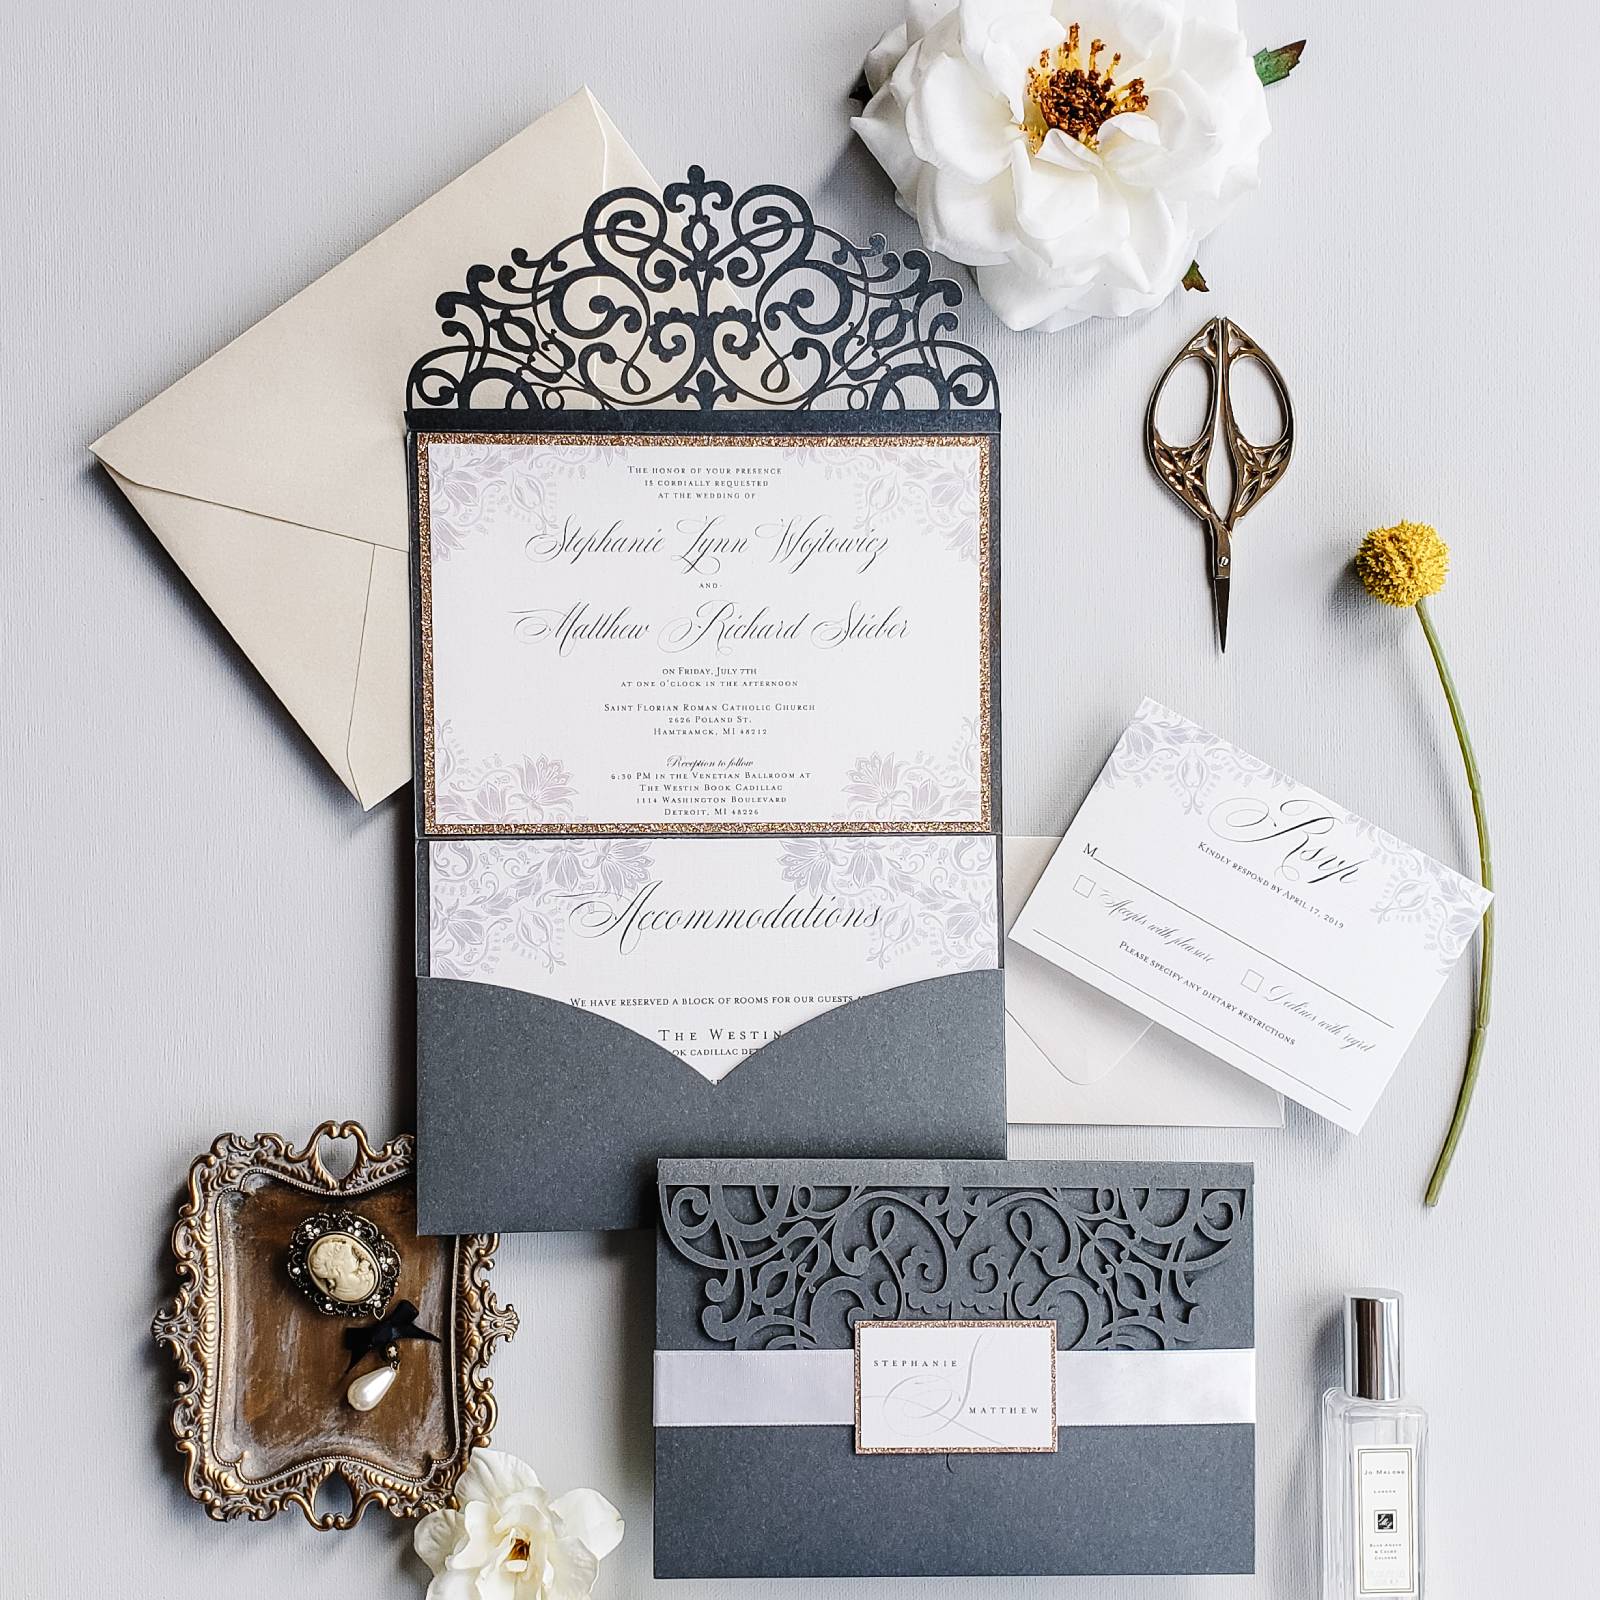 [vc_row][vc_column][vc_column_text]Purchase this listing to get a sample of our Intense wedding invitation suite.

The sample includes:

• 5